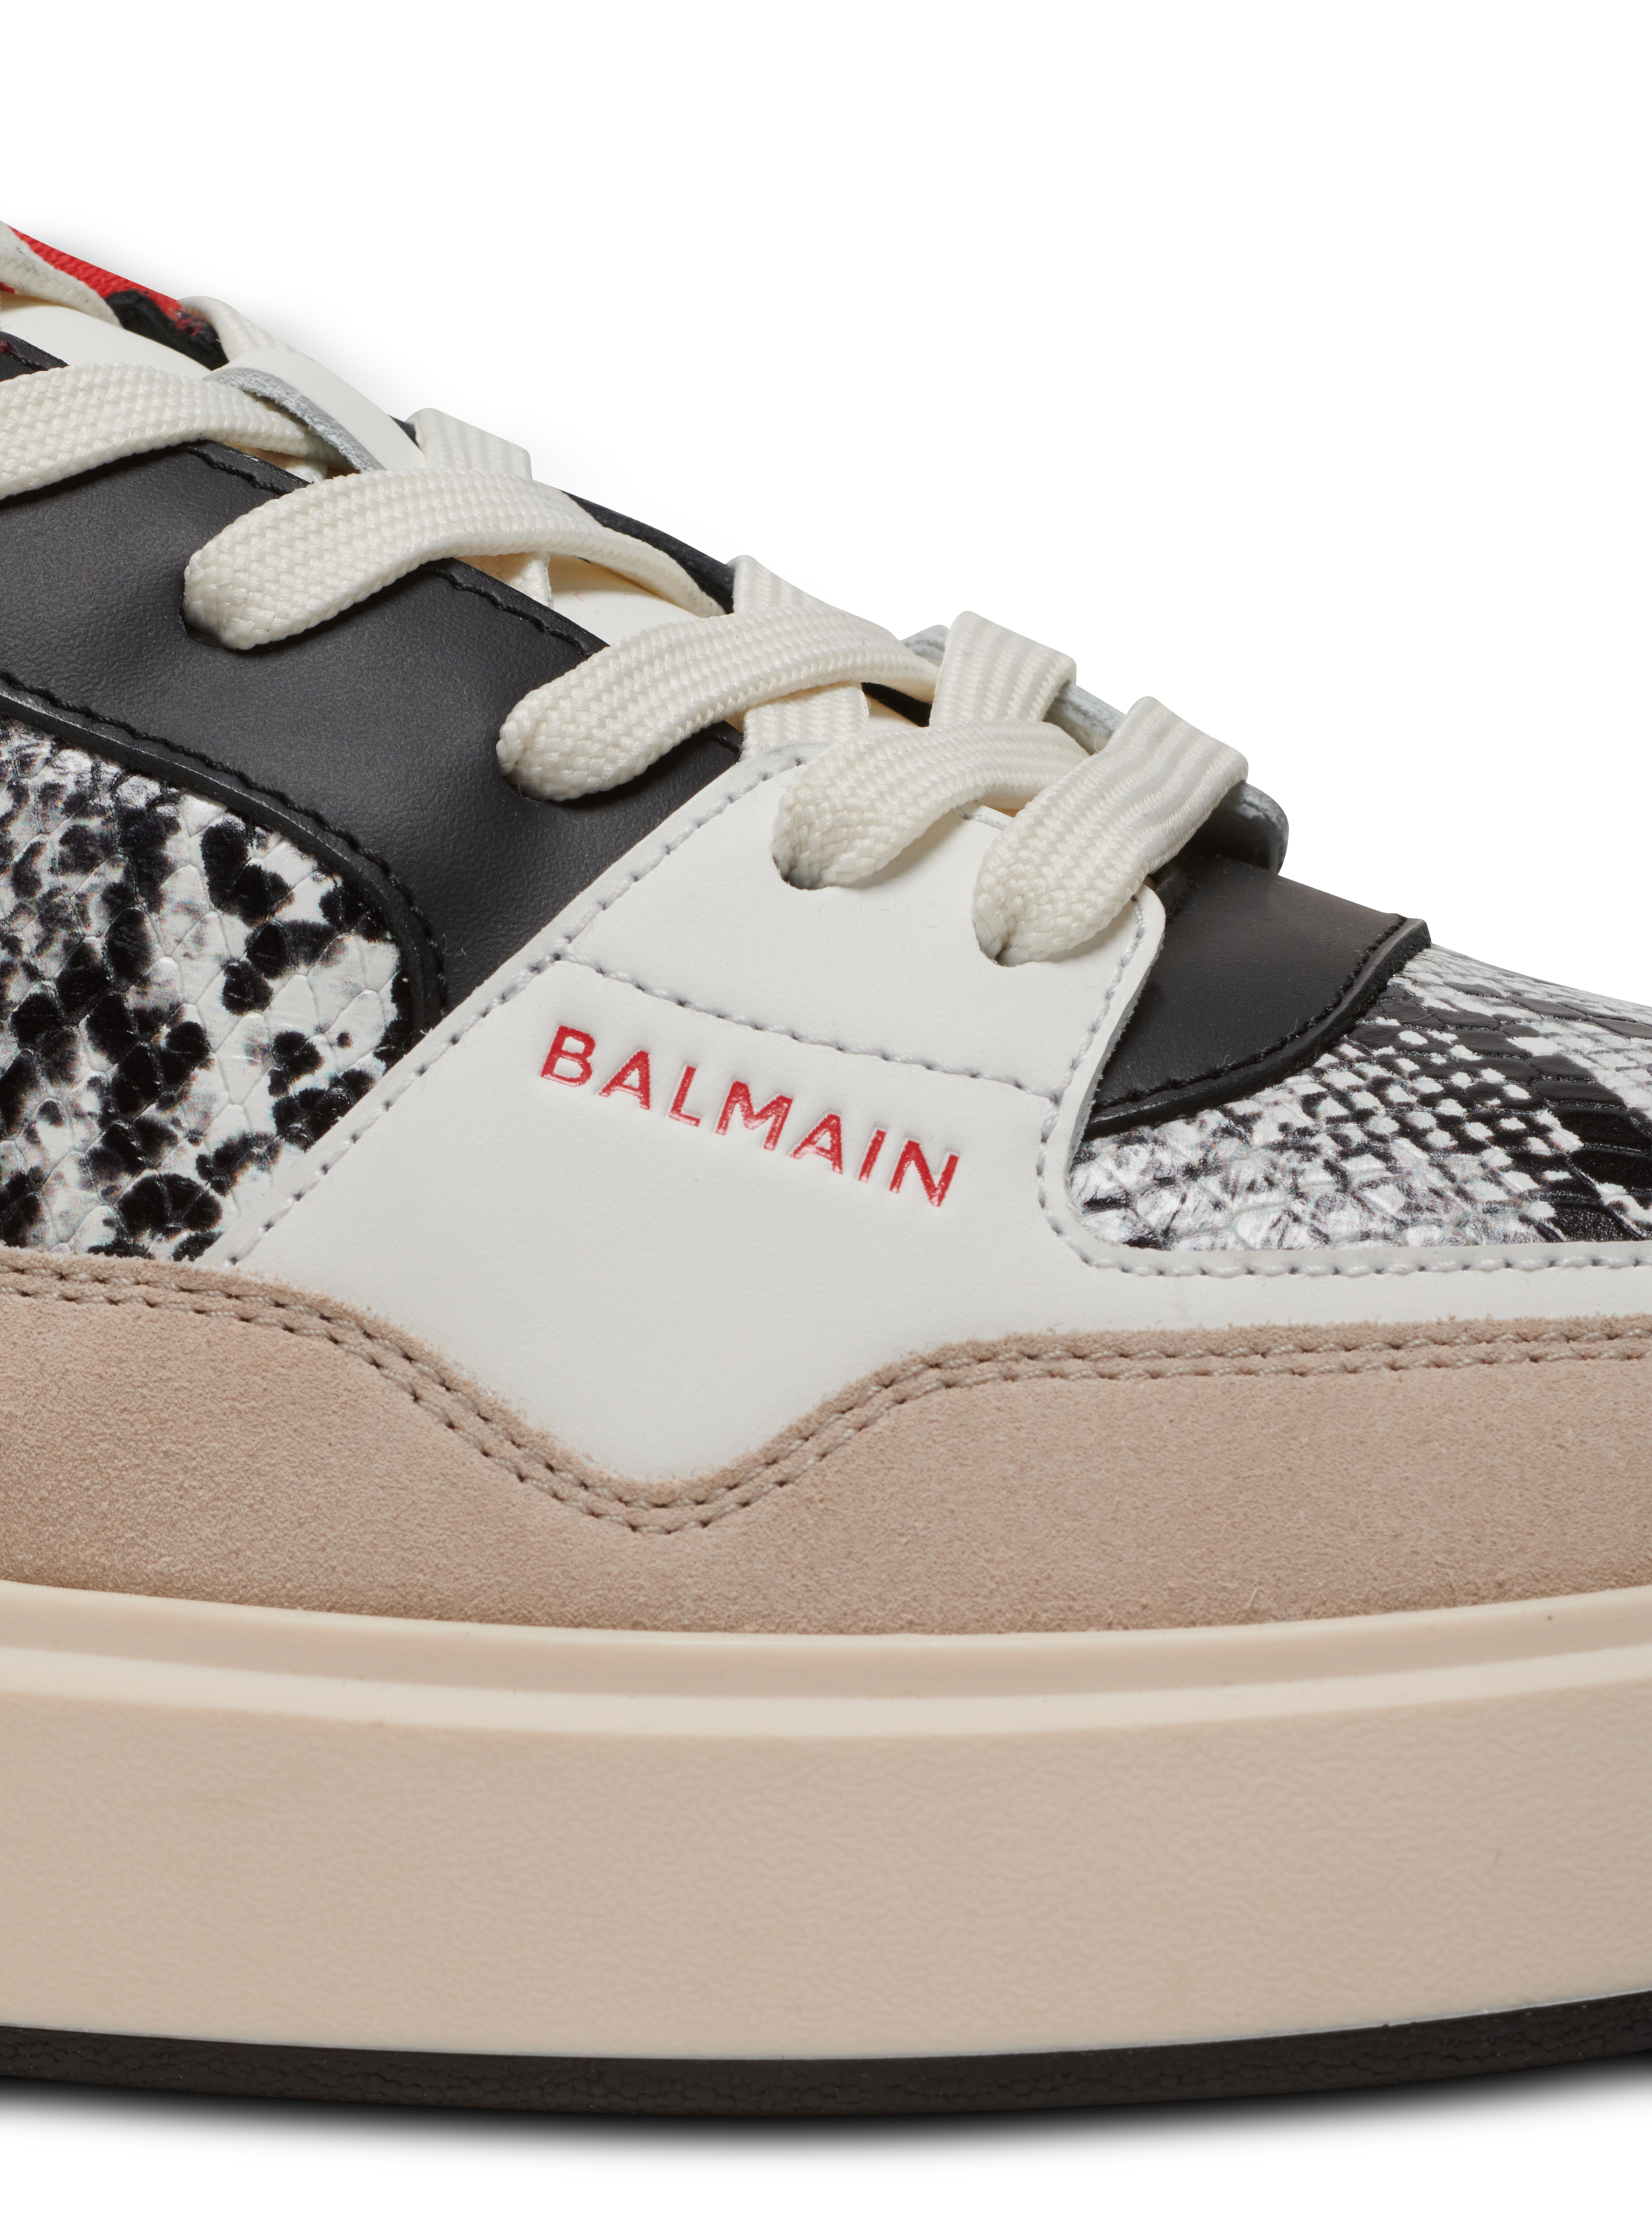 B-Court Flip snakeskin-effect leather and suede trainers